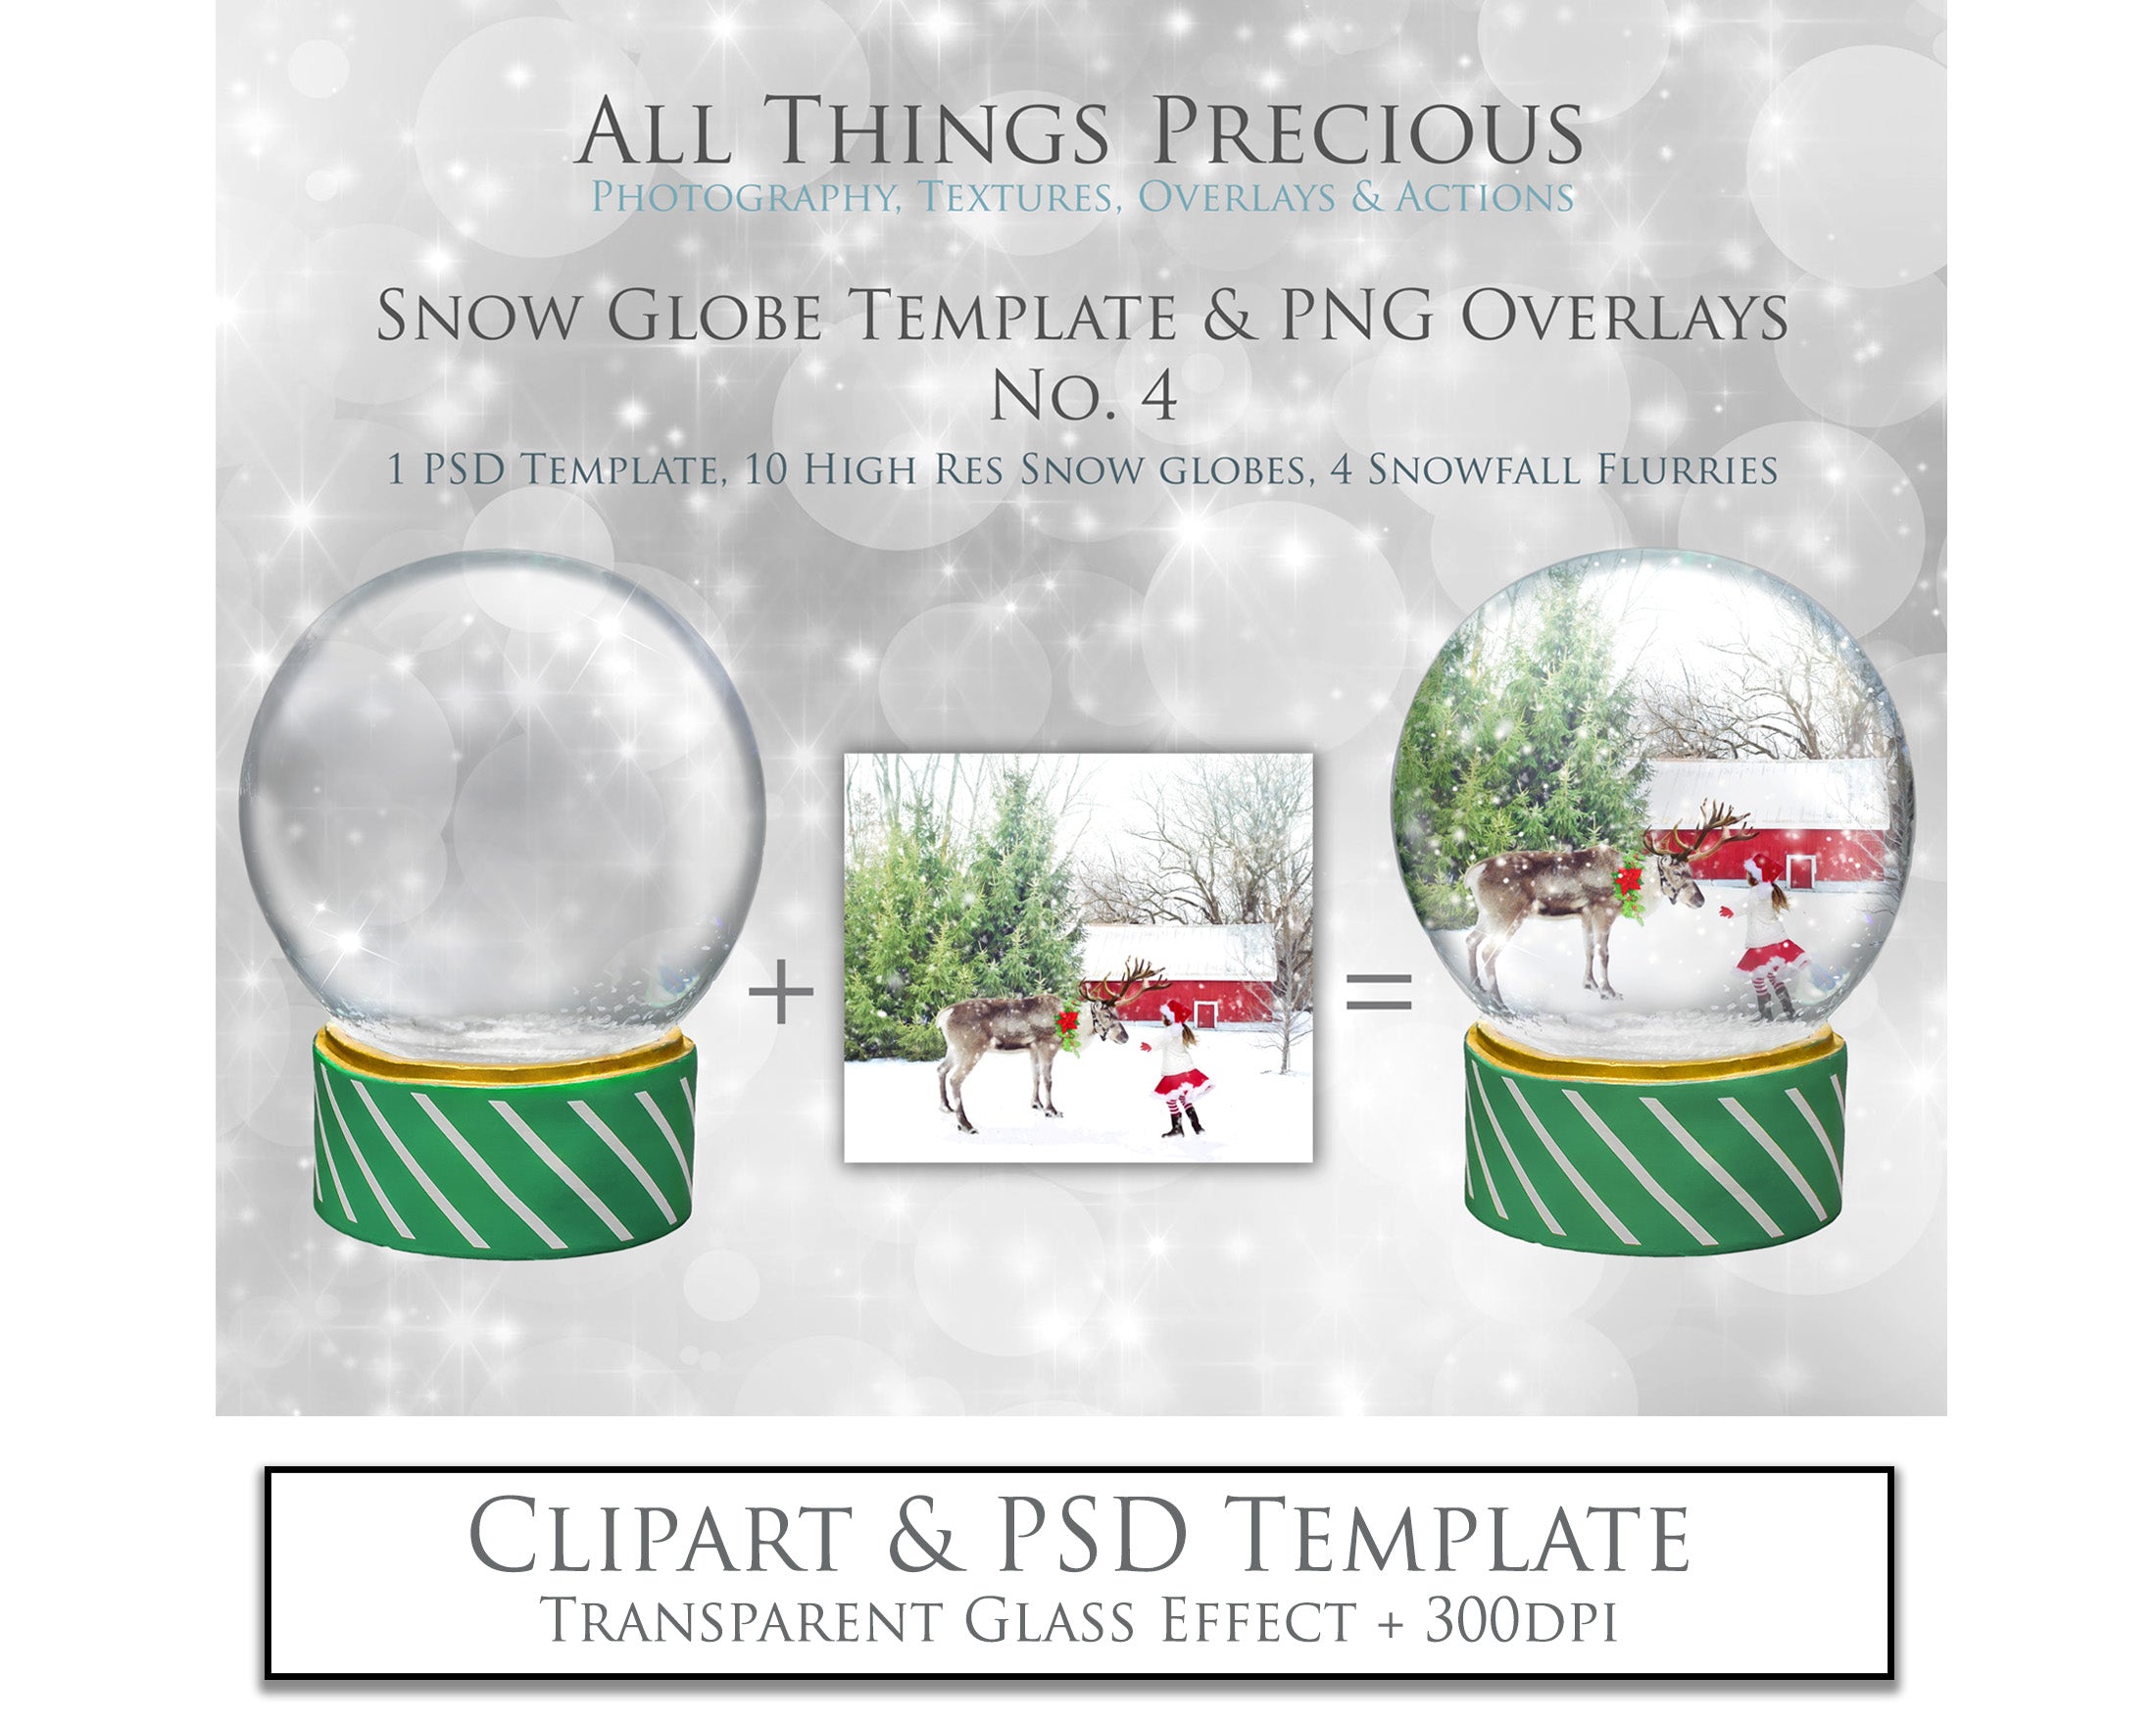 Digital Snow Globe Clipart with snow Overlays and a PSD Template included in the set.The globe is transparent, perfect to add your own images and retain the snow globe effect. Photoshop Photography Background. Printable, Editable for Christmas with Frozen Winter Theme. Glass graphic effects. ATP Textures